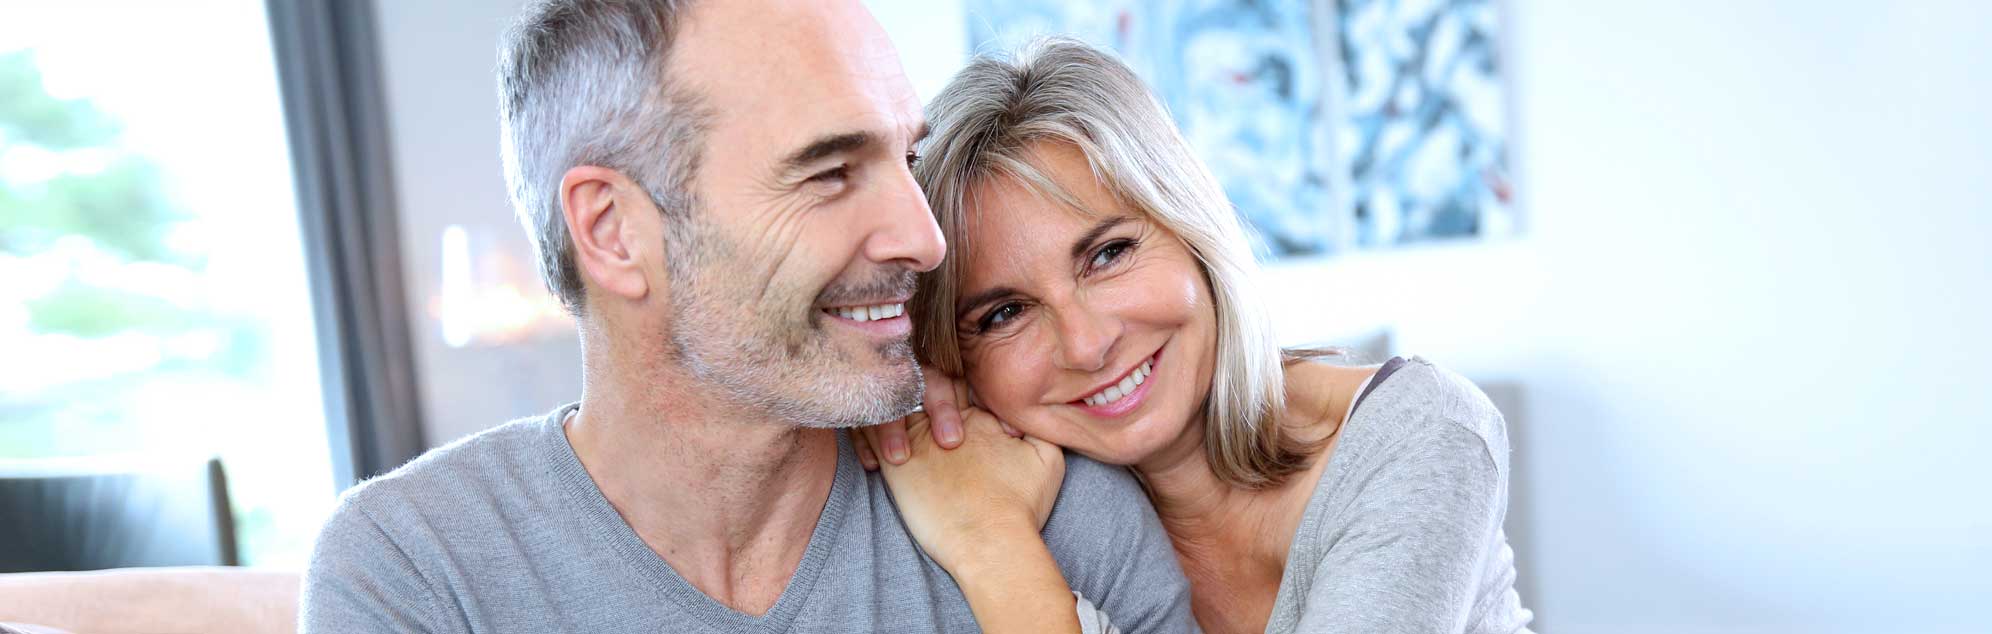 14 Dental Implant Benefits that Just Might Surprise You